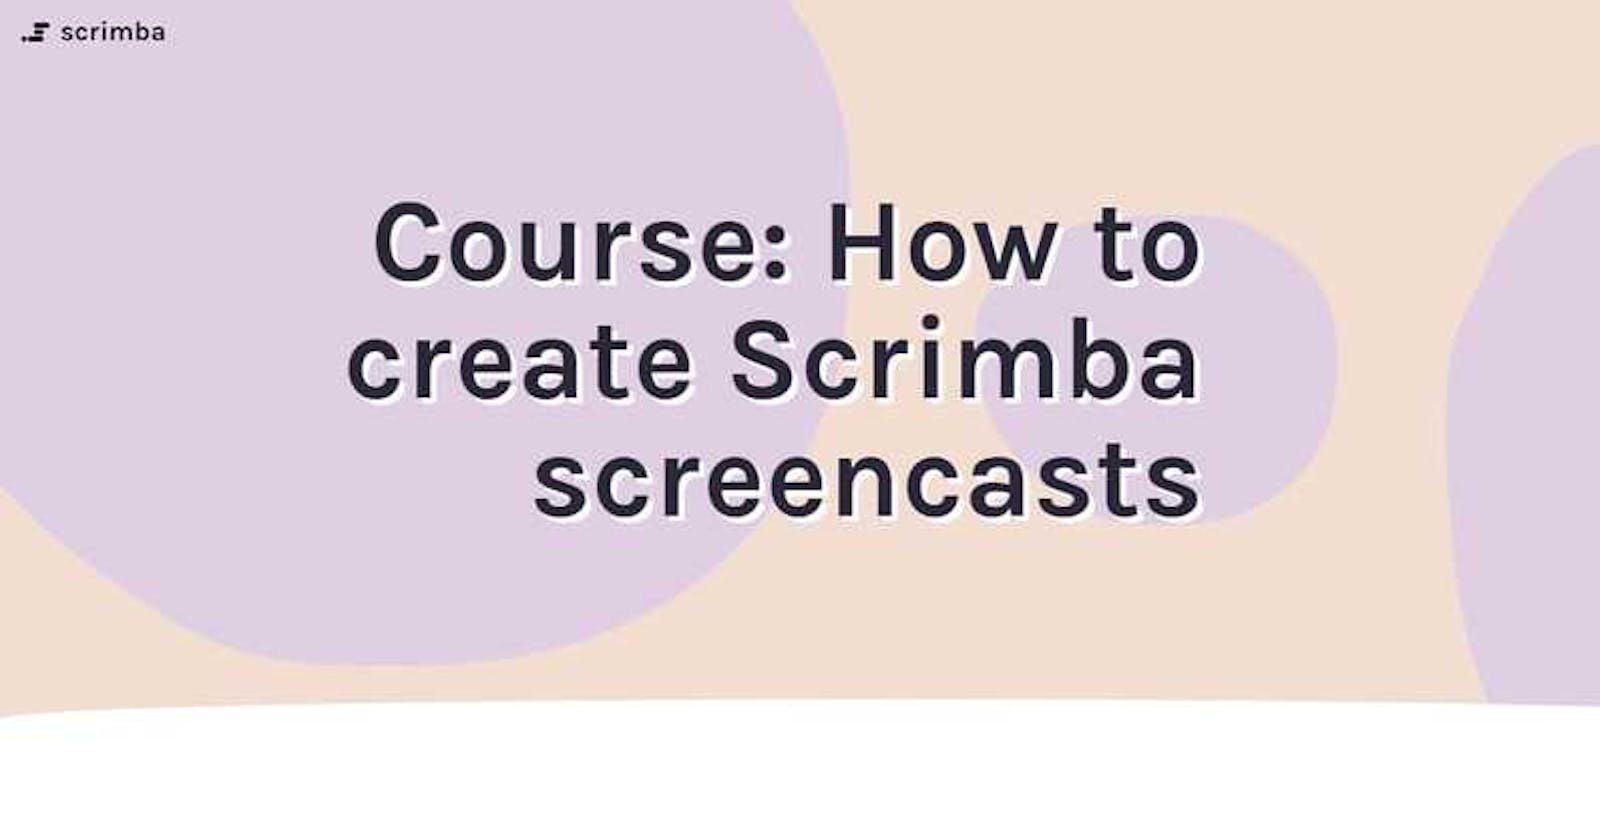 How to create Scrimba screencasts and turn them into a Scrimba course